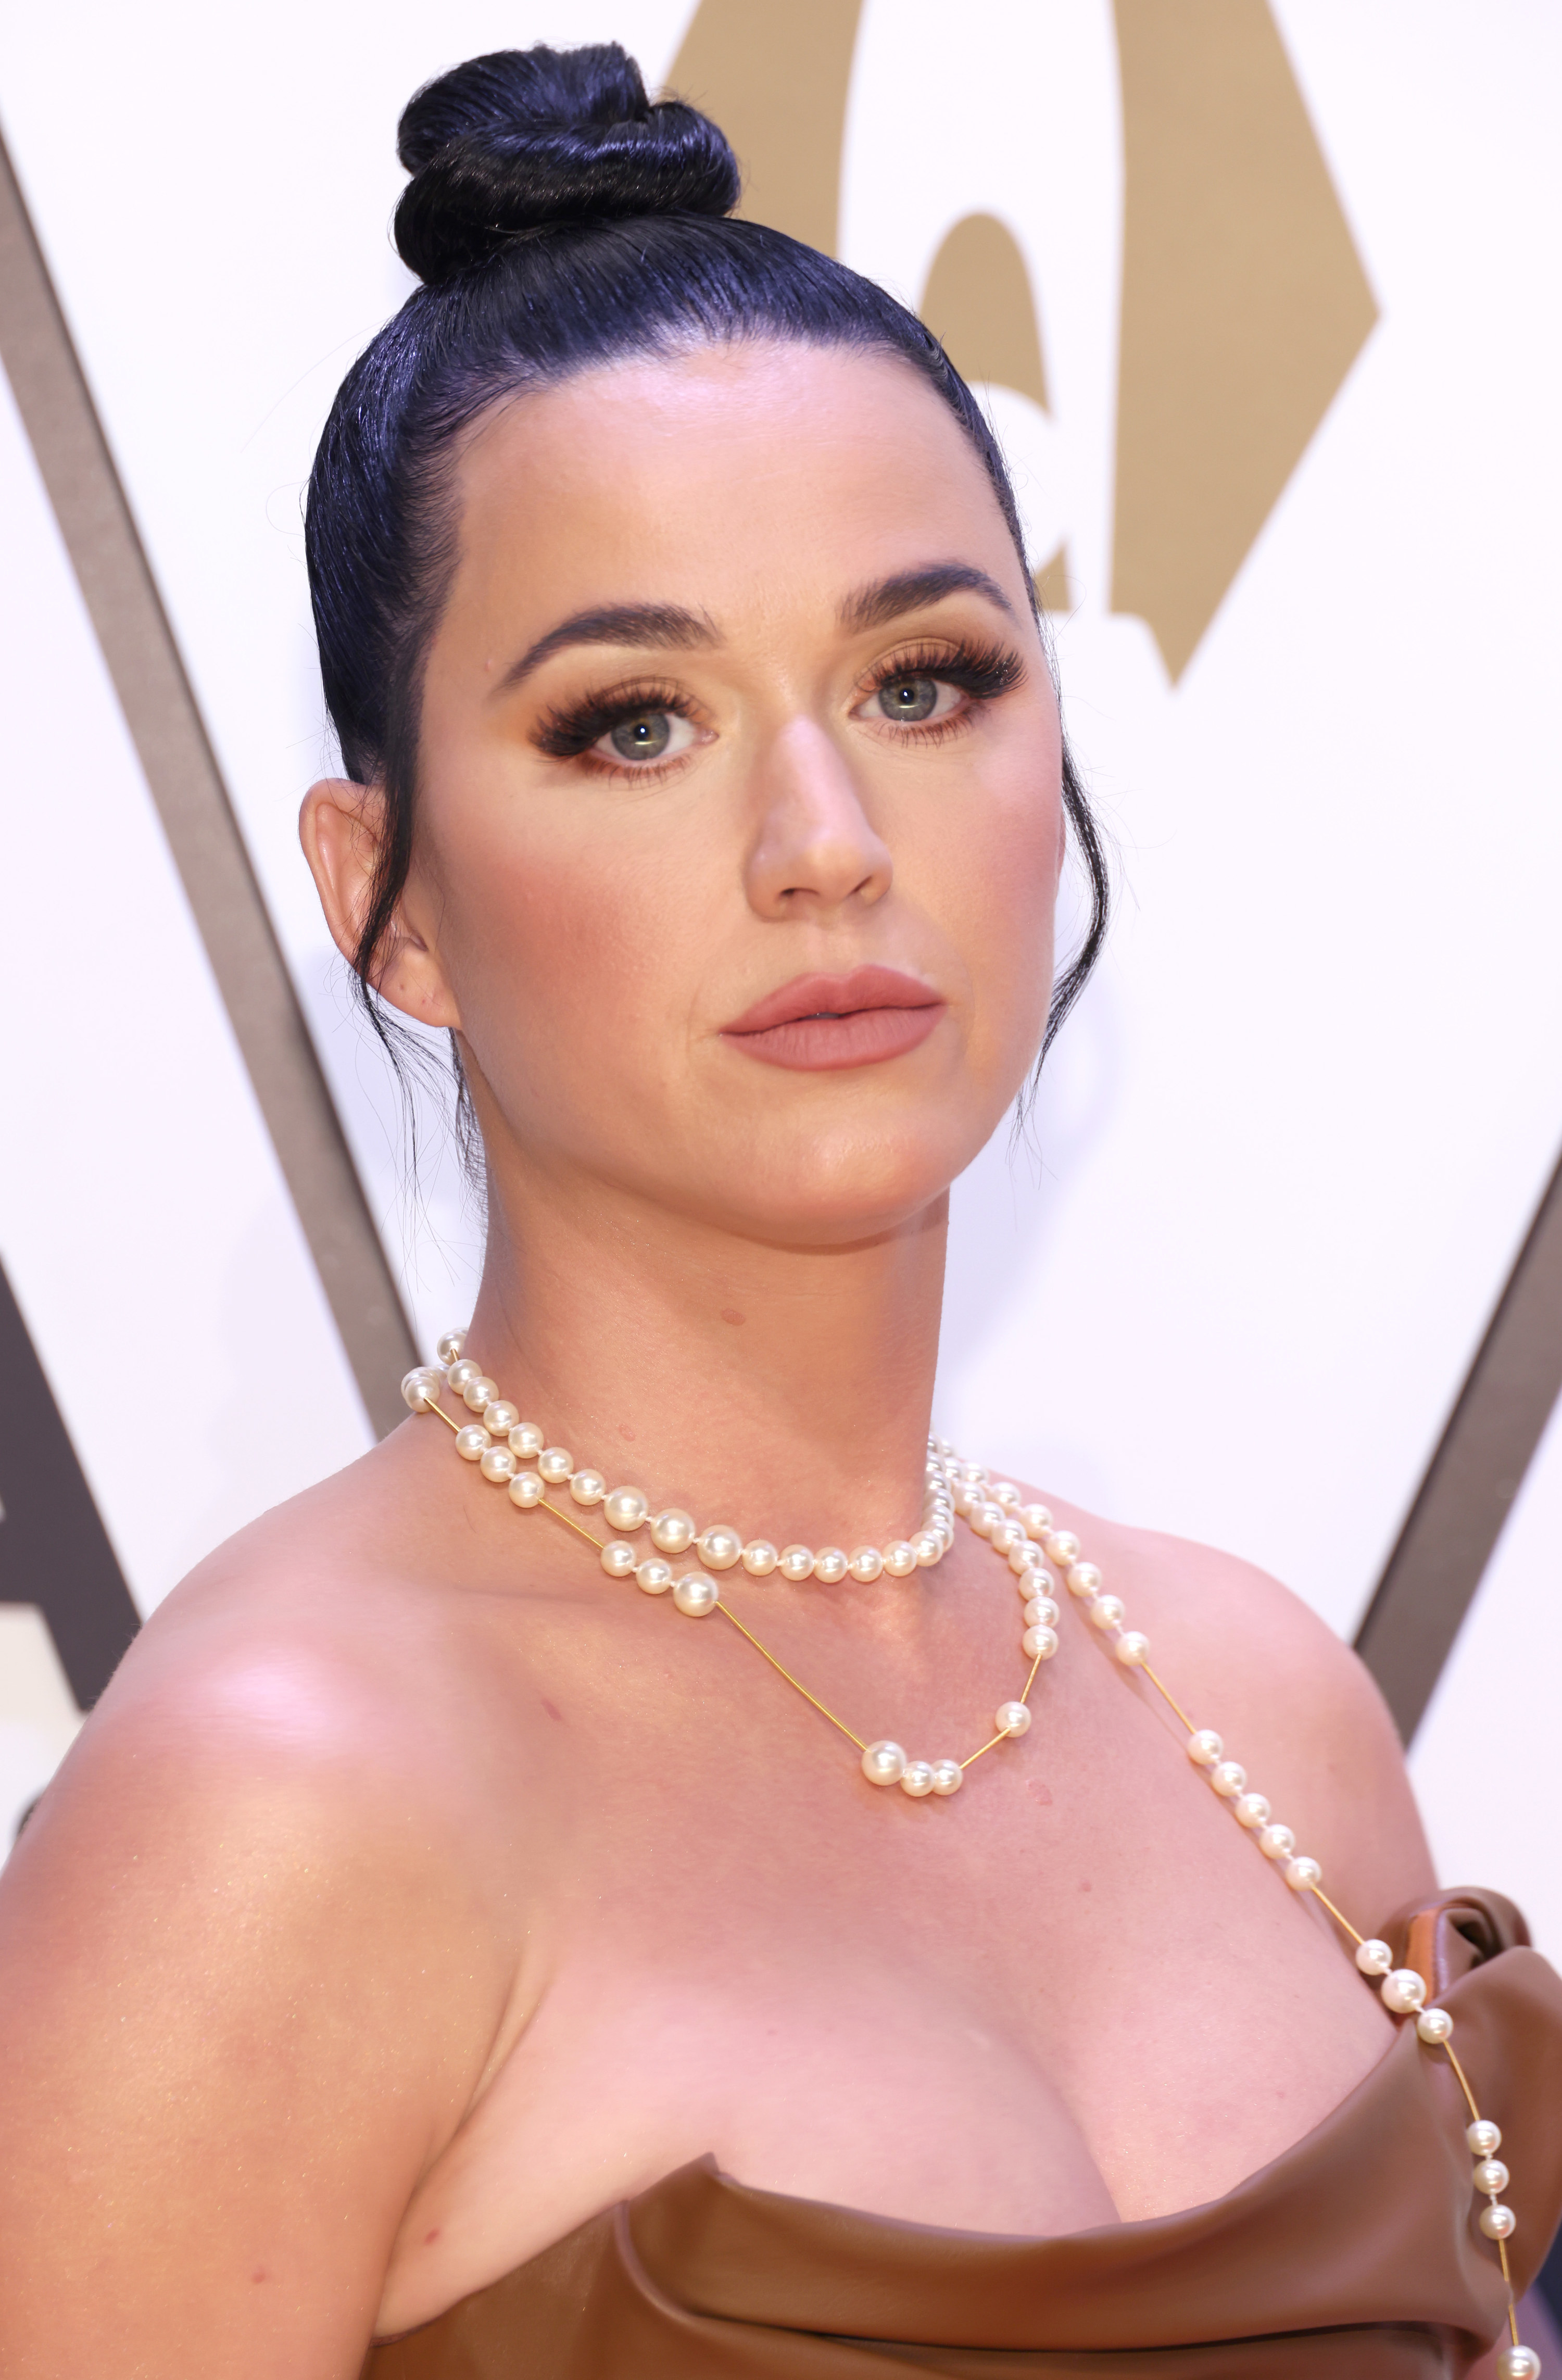 Katy Perry poses at the 55th annual Country Music Association awards on November 10, 2021